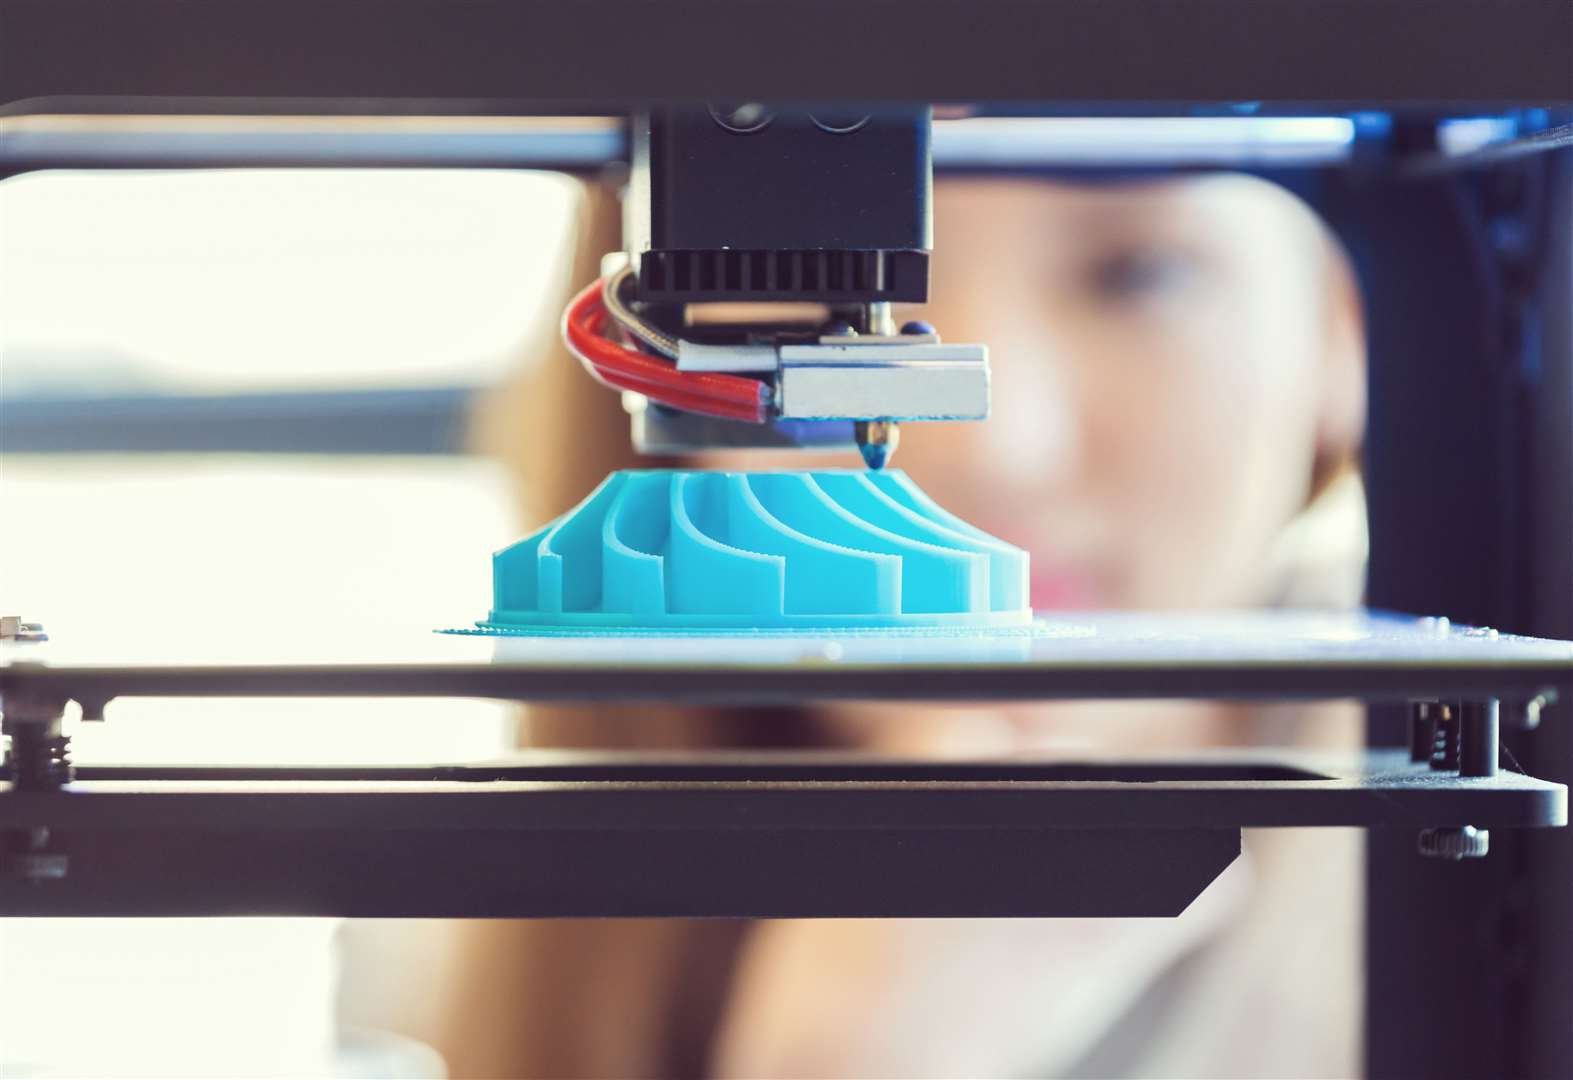 5 things to know before starting a 3D printer